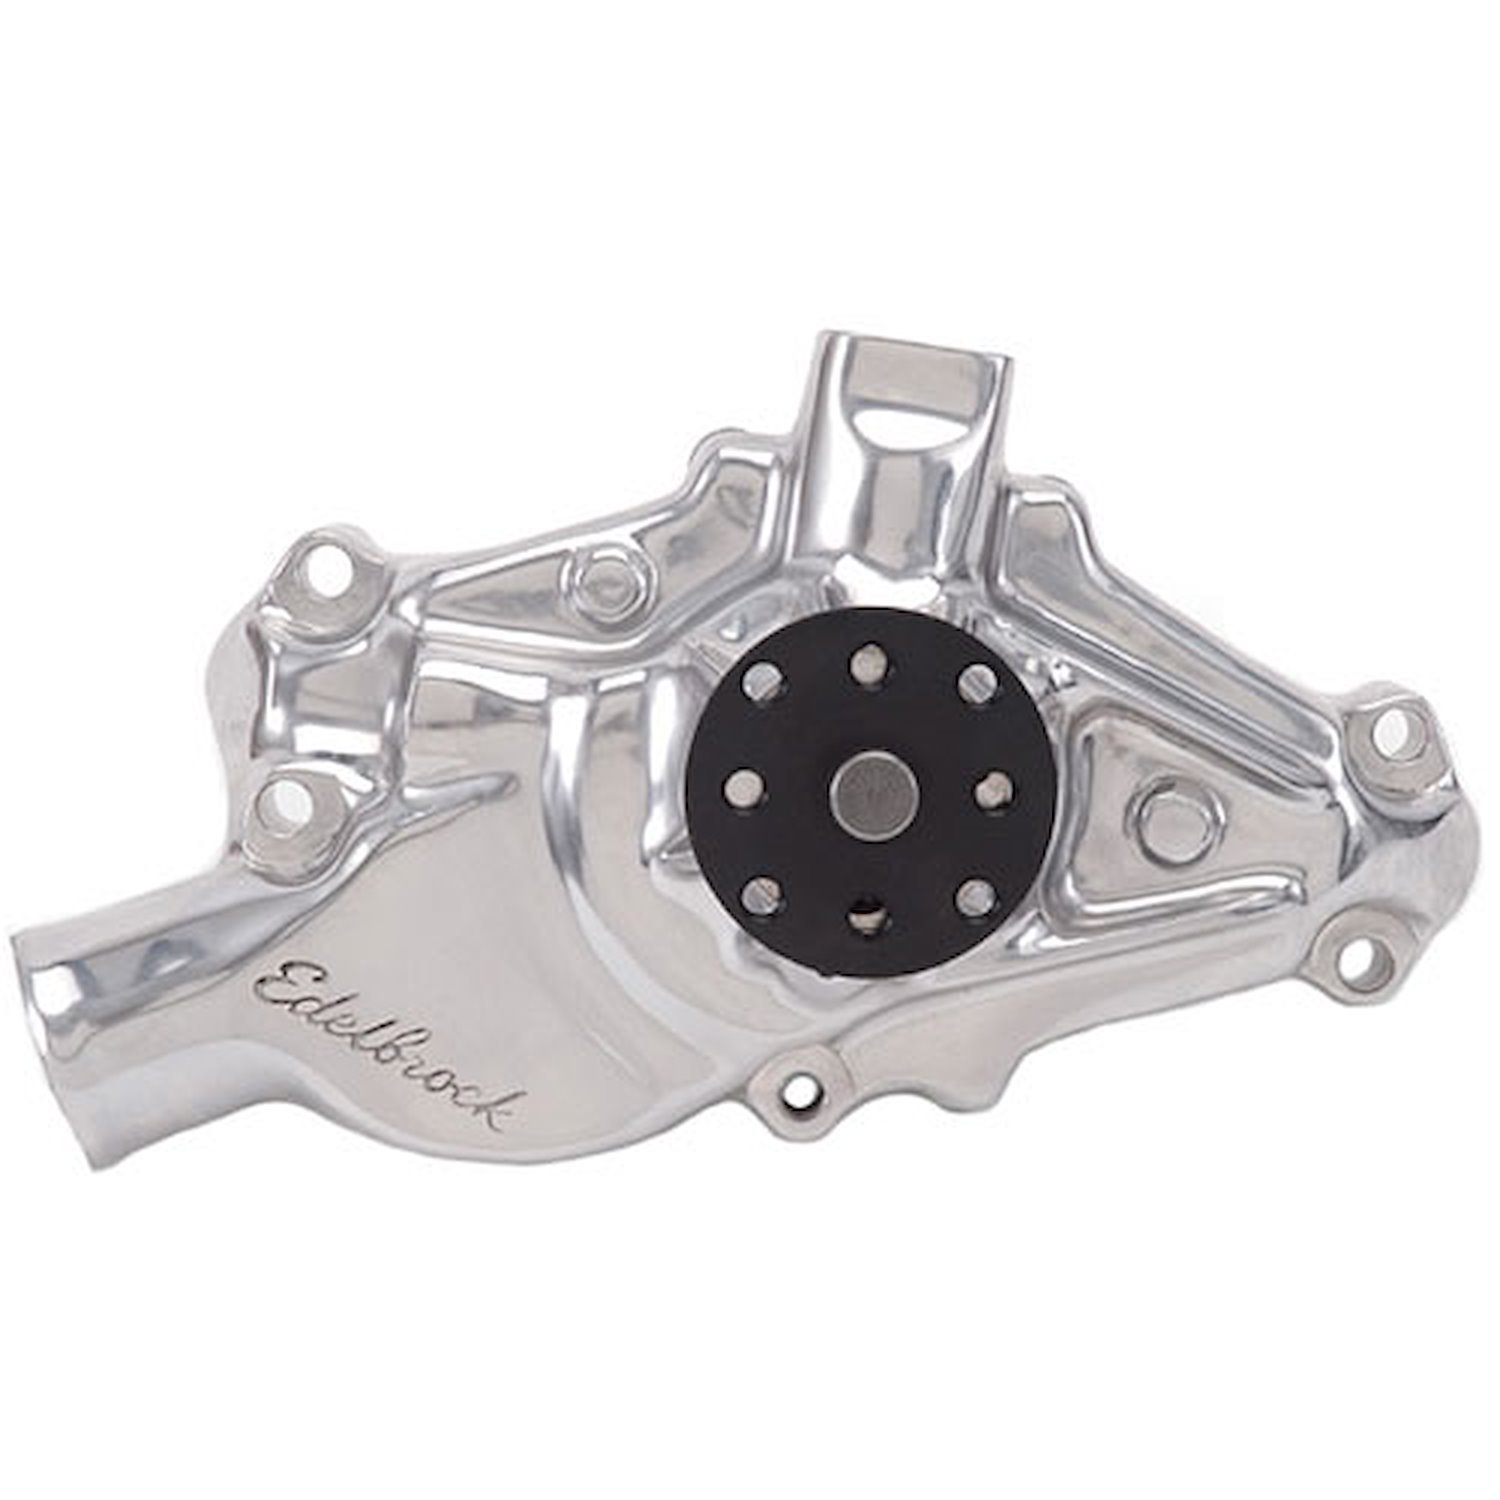 Victor Series Polished Aluminum Water Pump for 1955-1972 Chevy Small Block Cars & Trucks